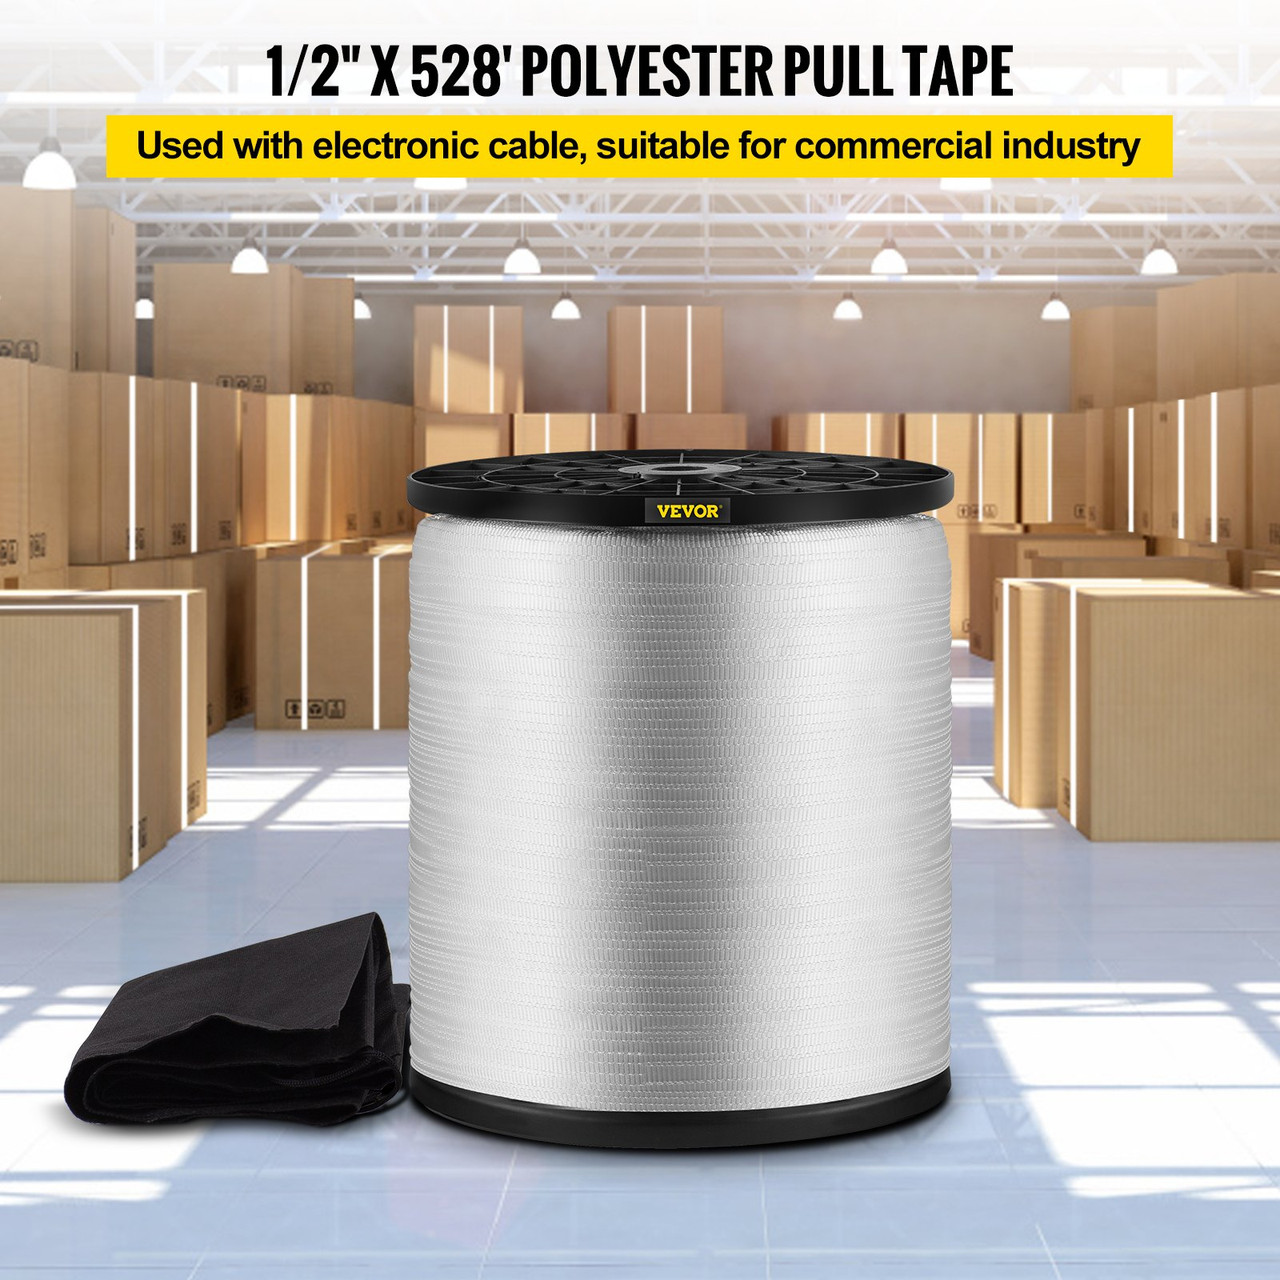 1/2" X 528' Polyester Pull Tape Flat Rope 1250 Lbs Tensile Capacity